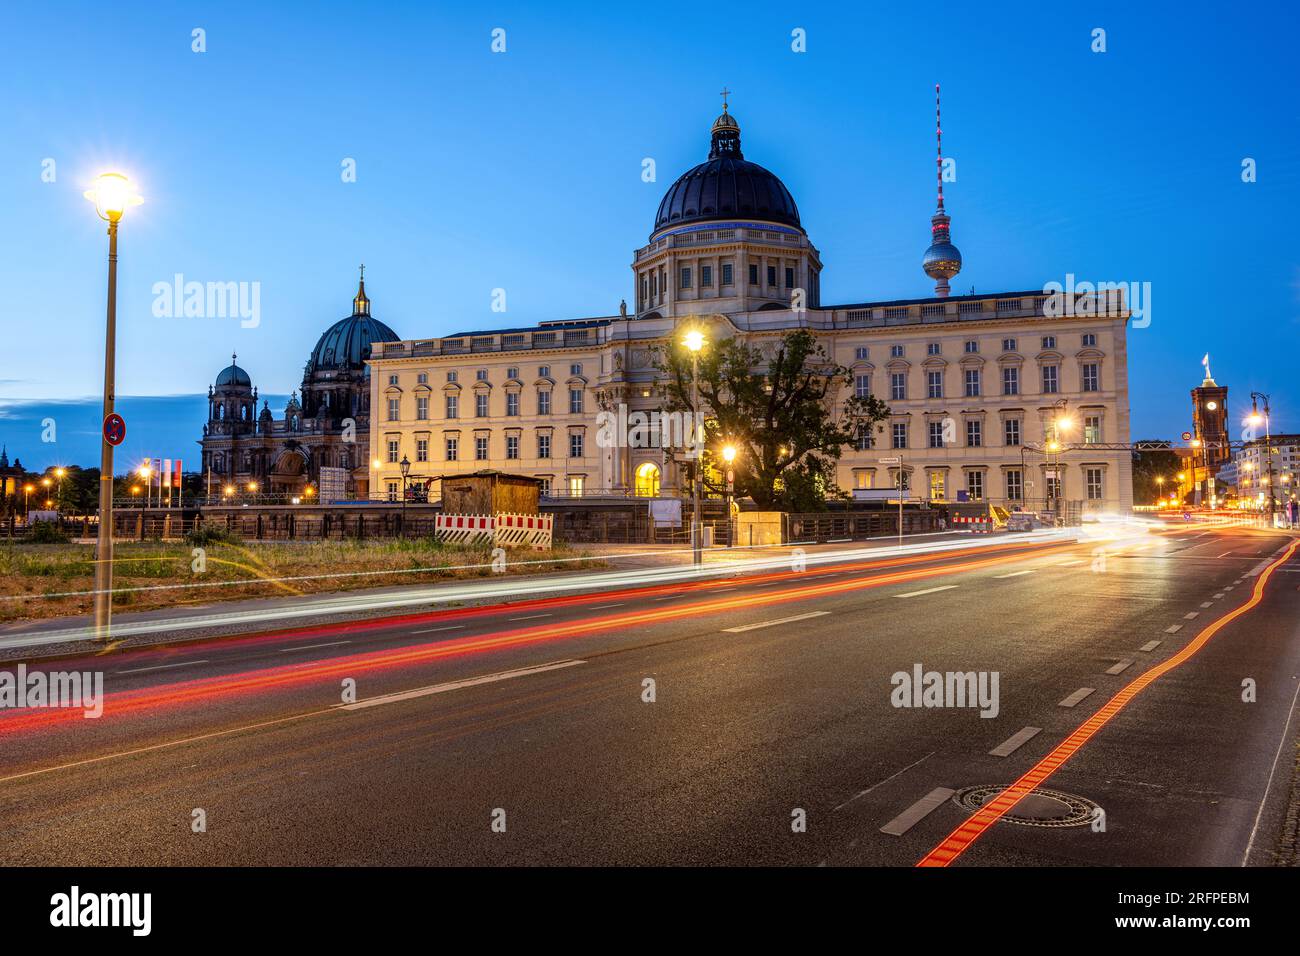 The rebuilt Berlin City Palace, the famous TV Tower and the Cathedral at night Stock Photo